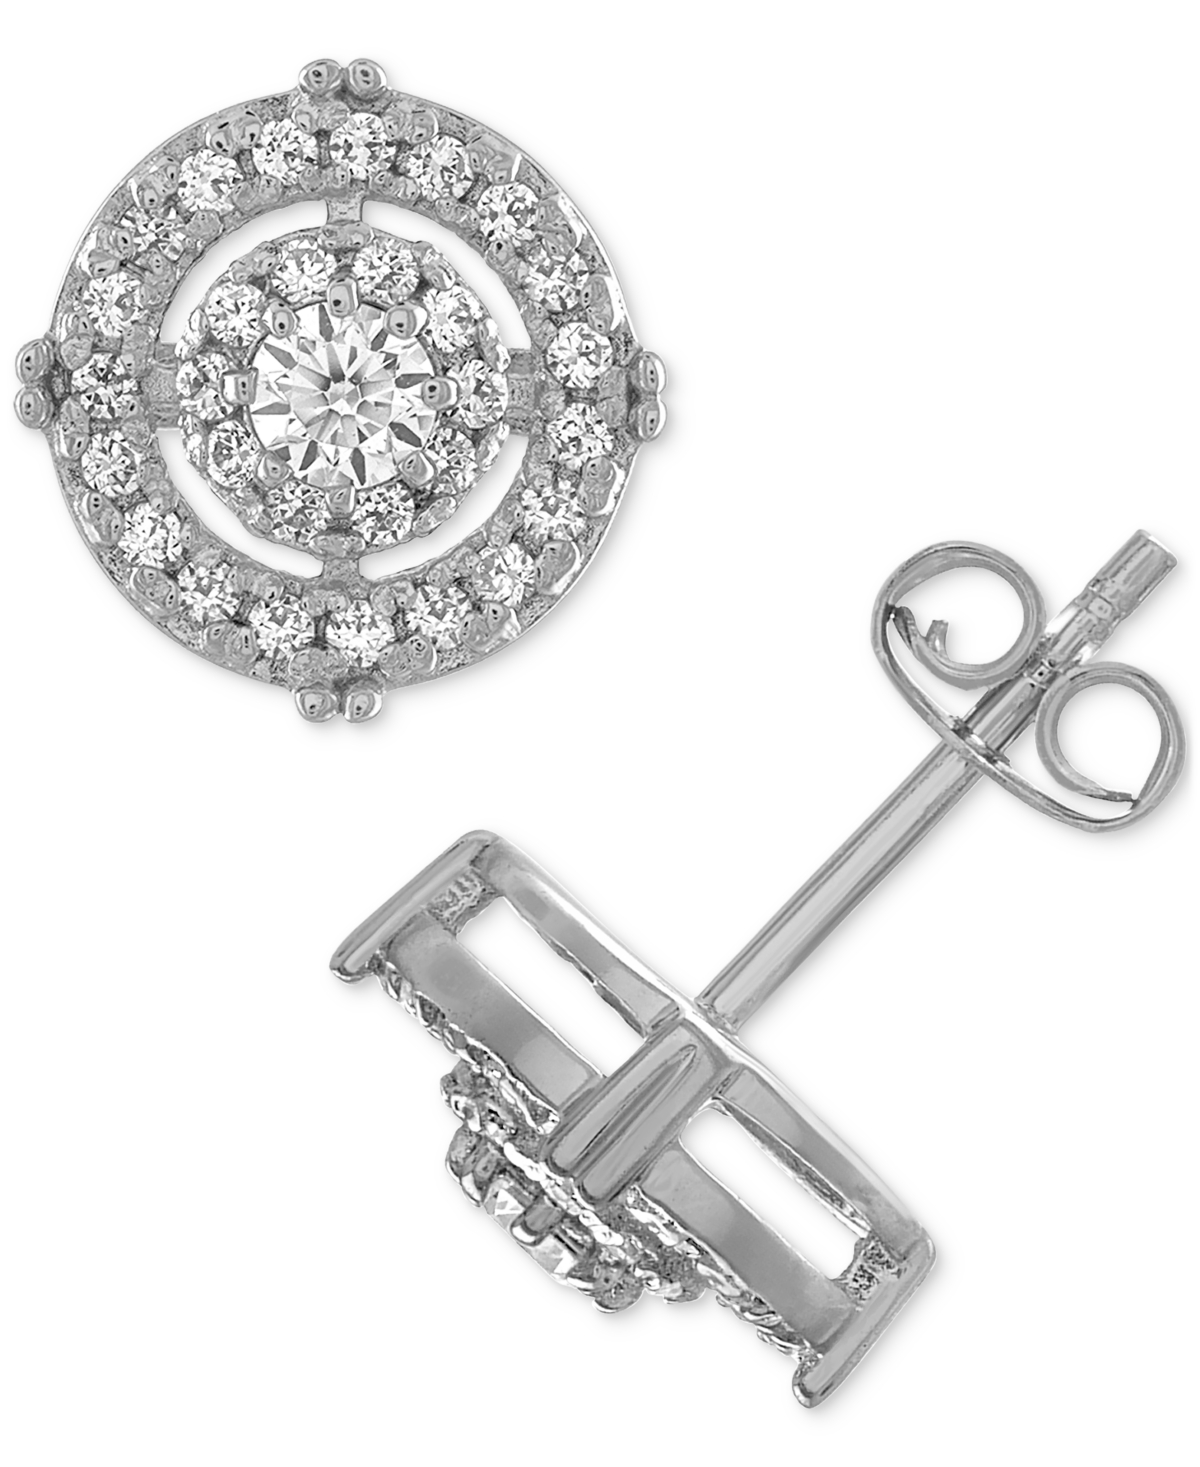 Cubic Zirconia Circle Stud Earrings in Sterling Silver, Created for Macy's - Silver